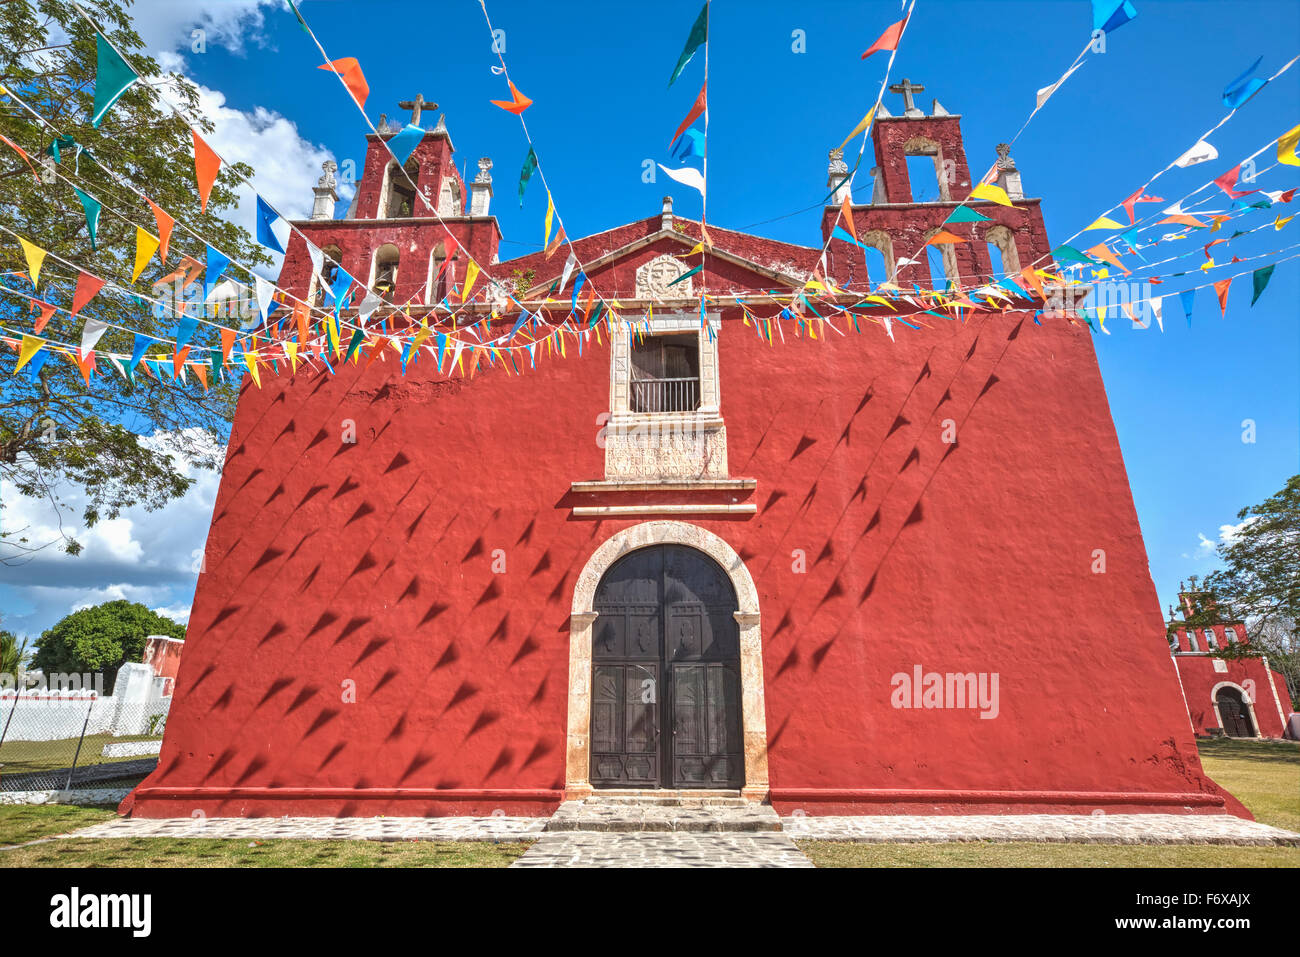 Teabo Convent of Saints Peter and Paul, built in late seventeenth century, Route of the Convents; Yucatan, Mexico Stock Photo